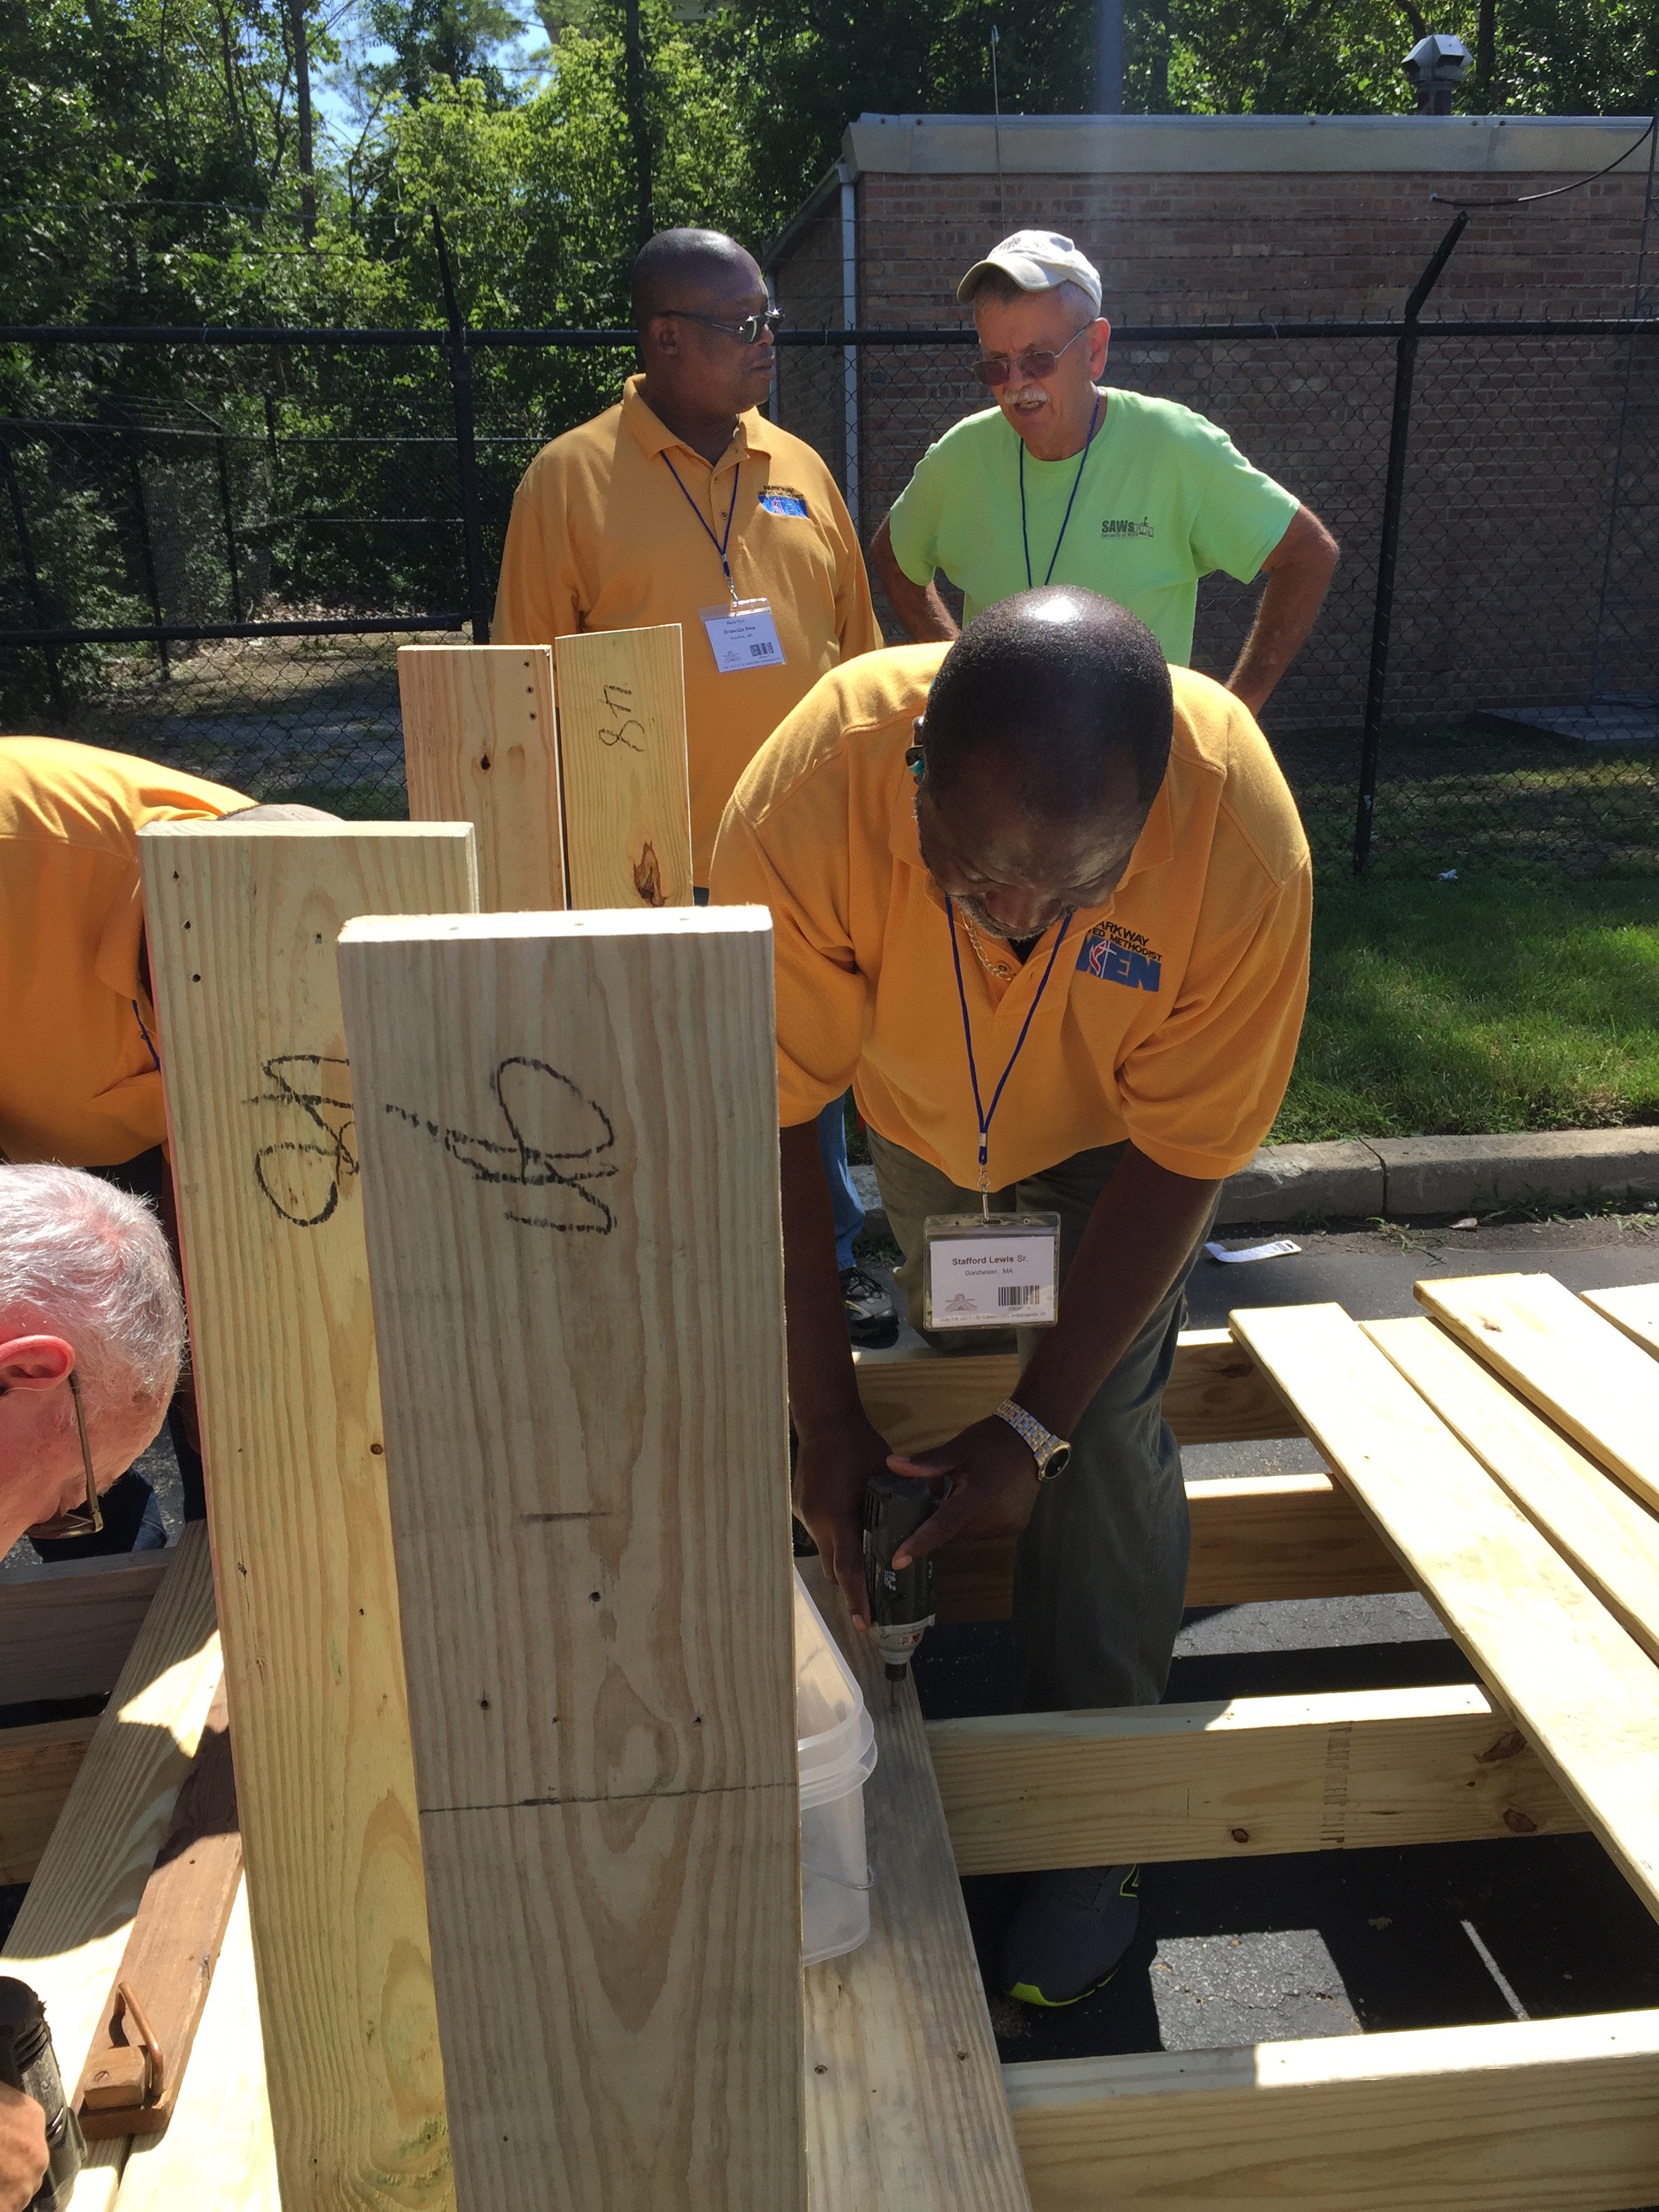 Members of United Methodist Men join with Servants at Work (SAWs), a ministry of St. Luke's United Methodist Church in Indianapolis, to construct wheelchair ramps. Many of the men involved in the project were from Parkway United Methodist Church in Milton, Mass. Photo by Heather Hahn, UMNS.